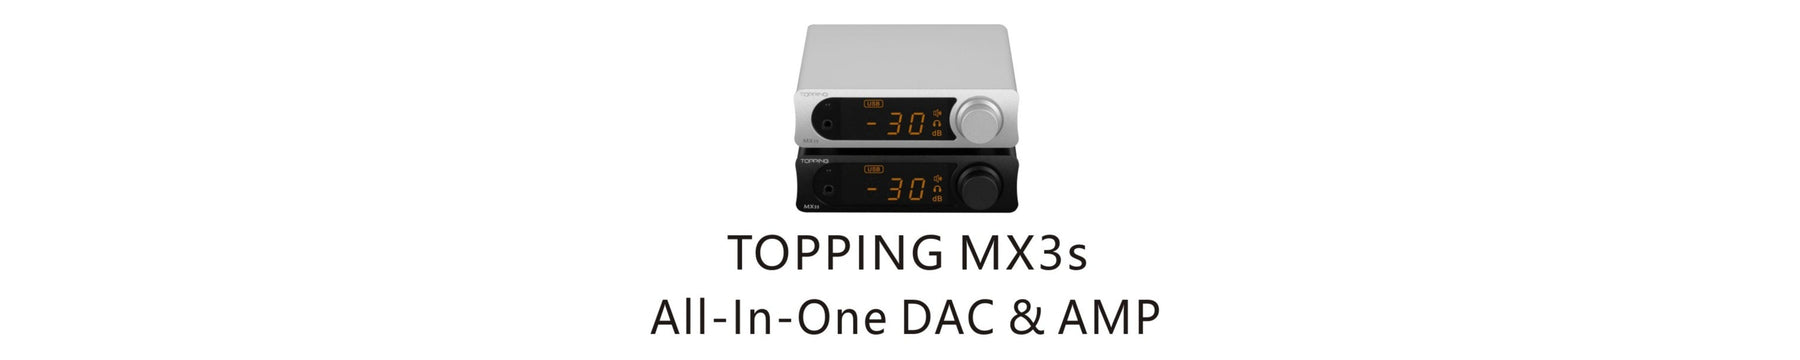 Topping Introduces All-New "MX3S" All-in-One Desktop DAC, Headphone AMP, and Speaker AMP device!!